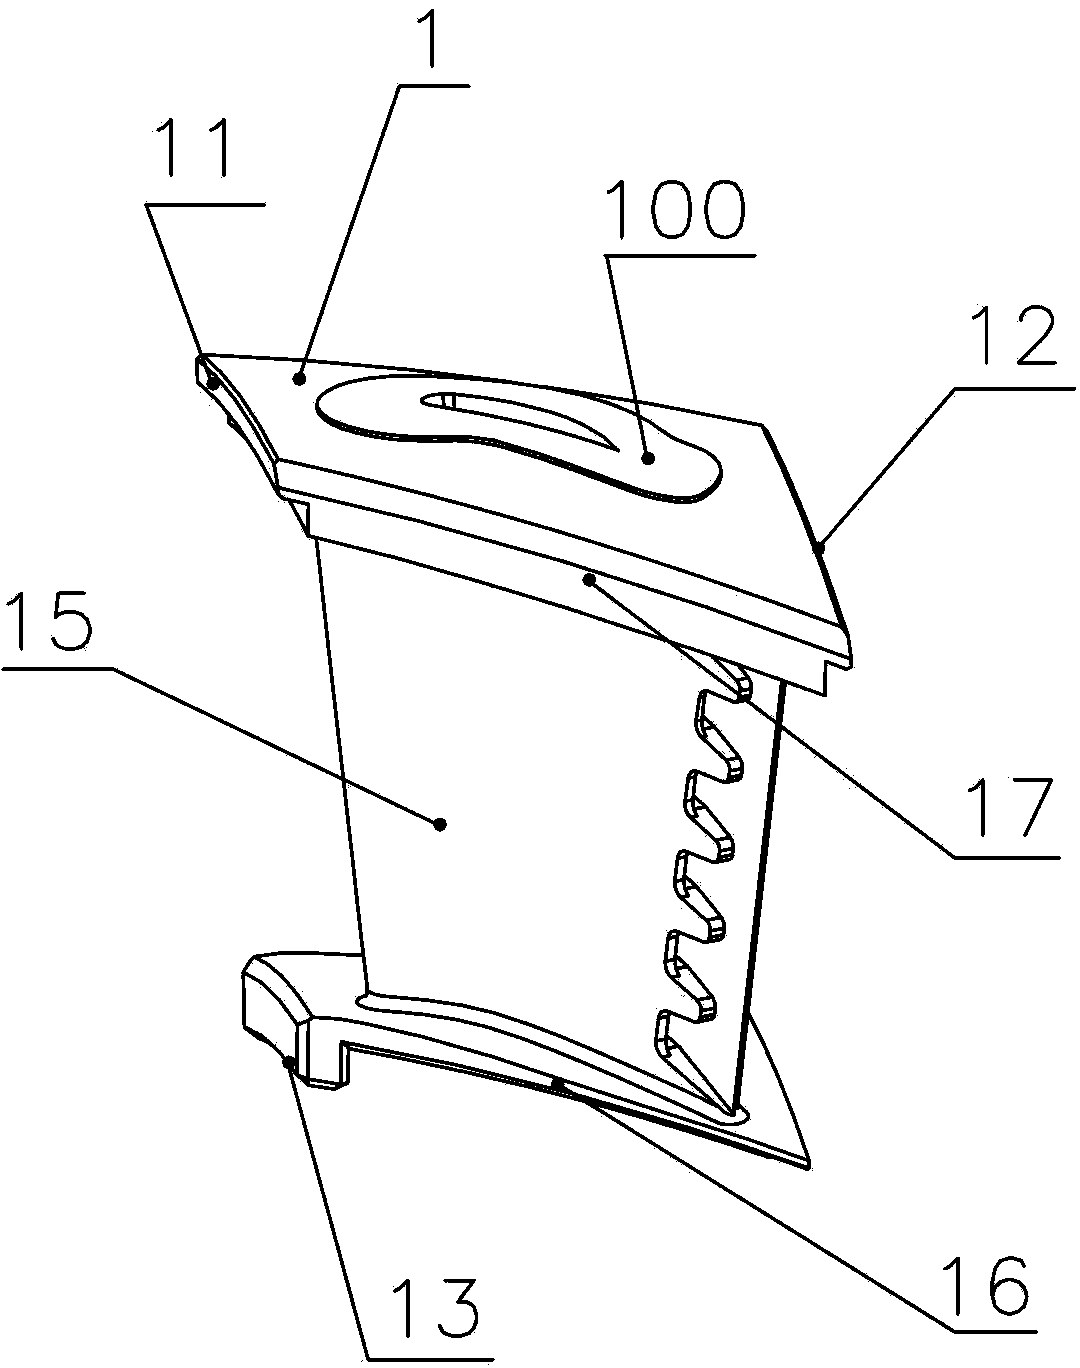 Device for cooling guiding device group of turbine